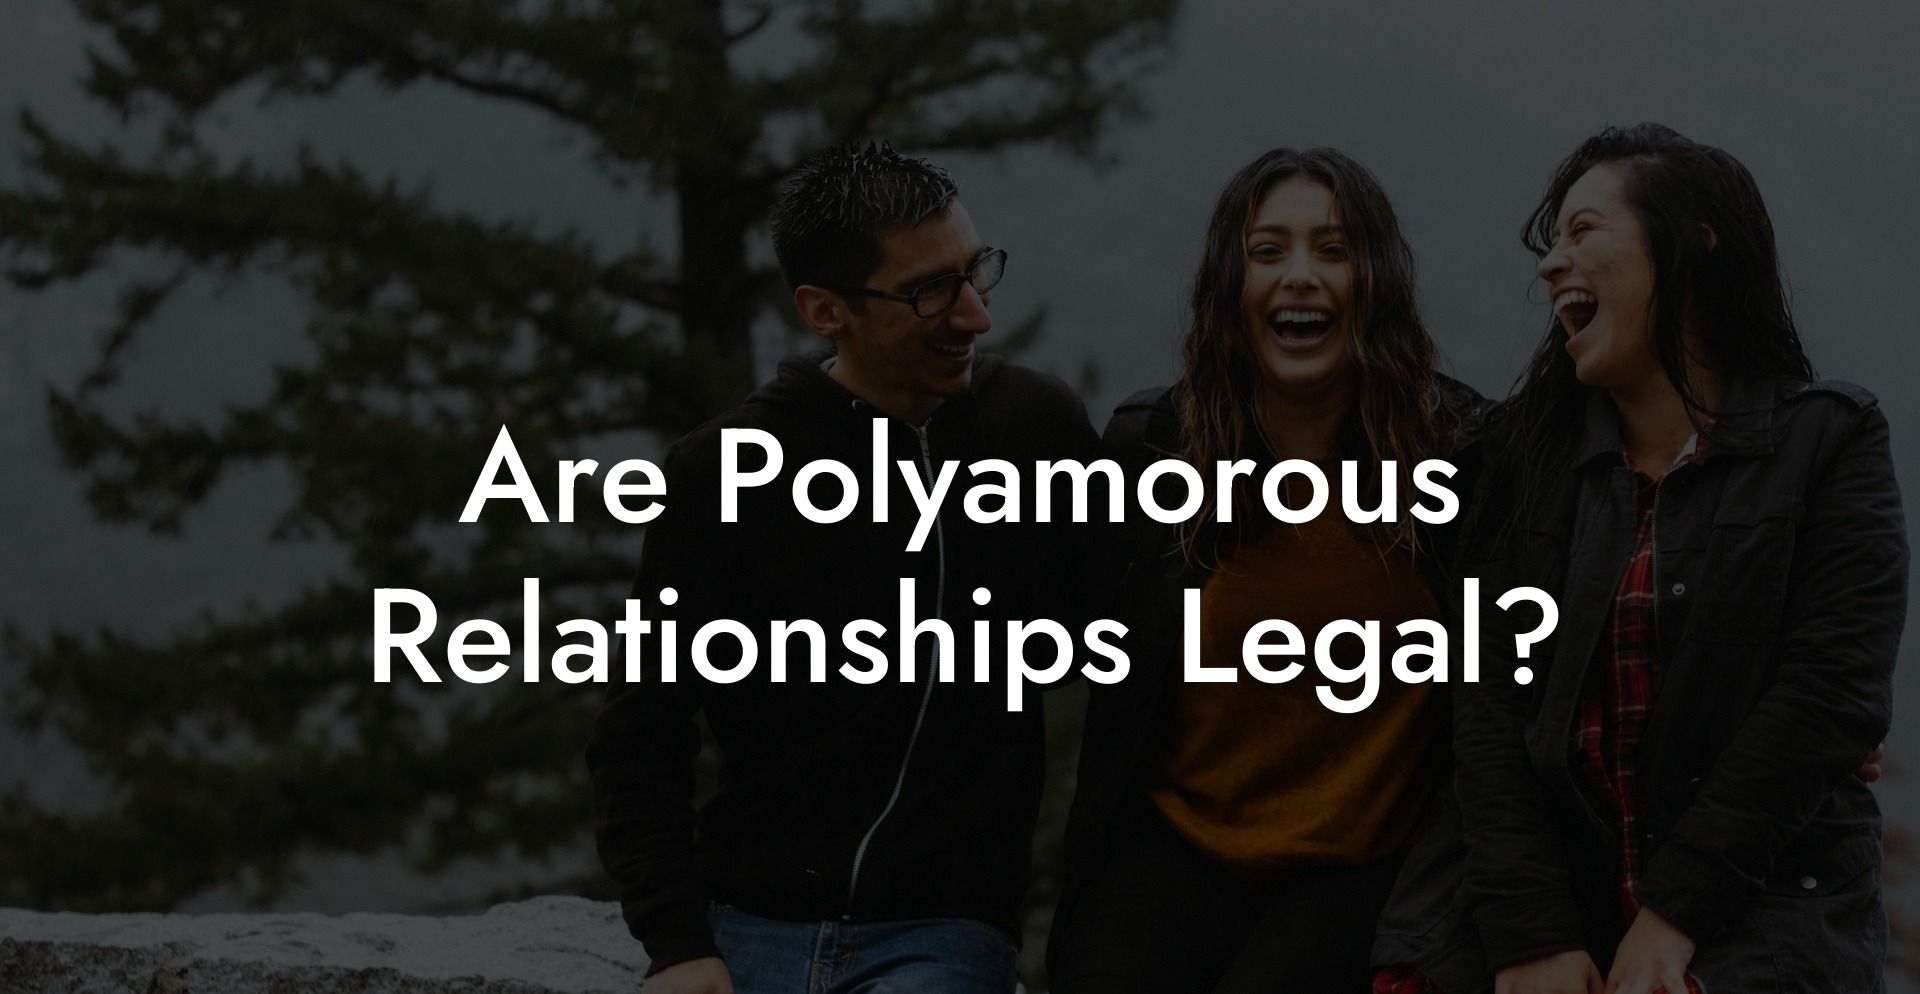 Are Polyamorous Relationships Legal?